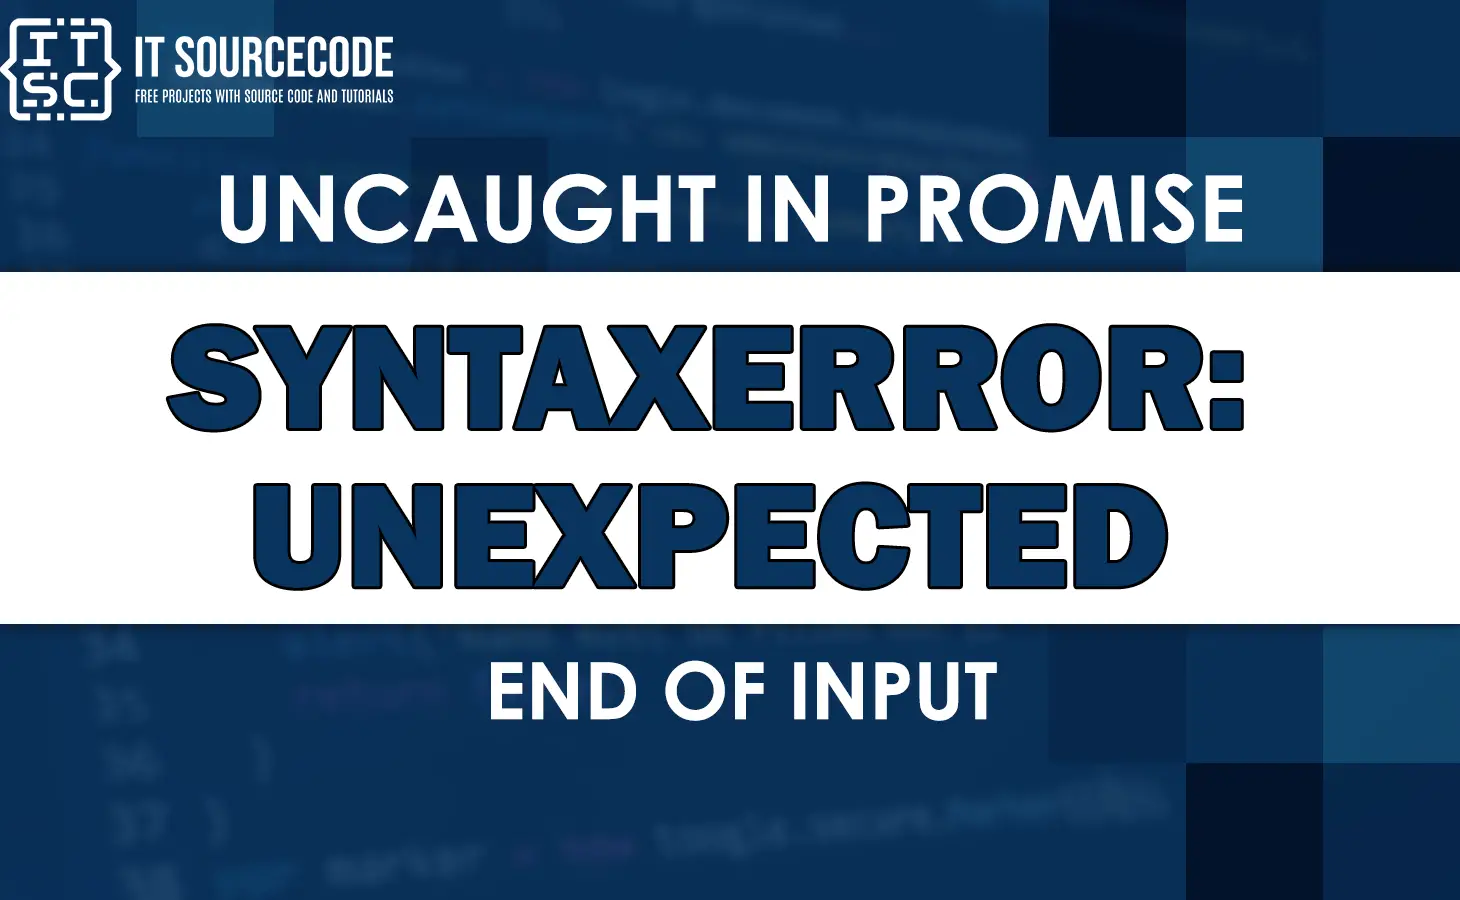 Uncaught in promise syntaxerror: unexpected end of input